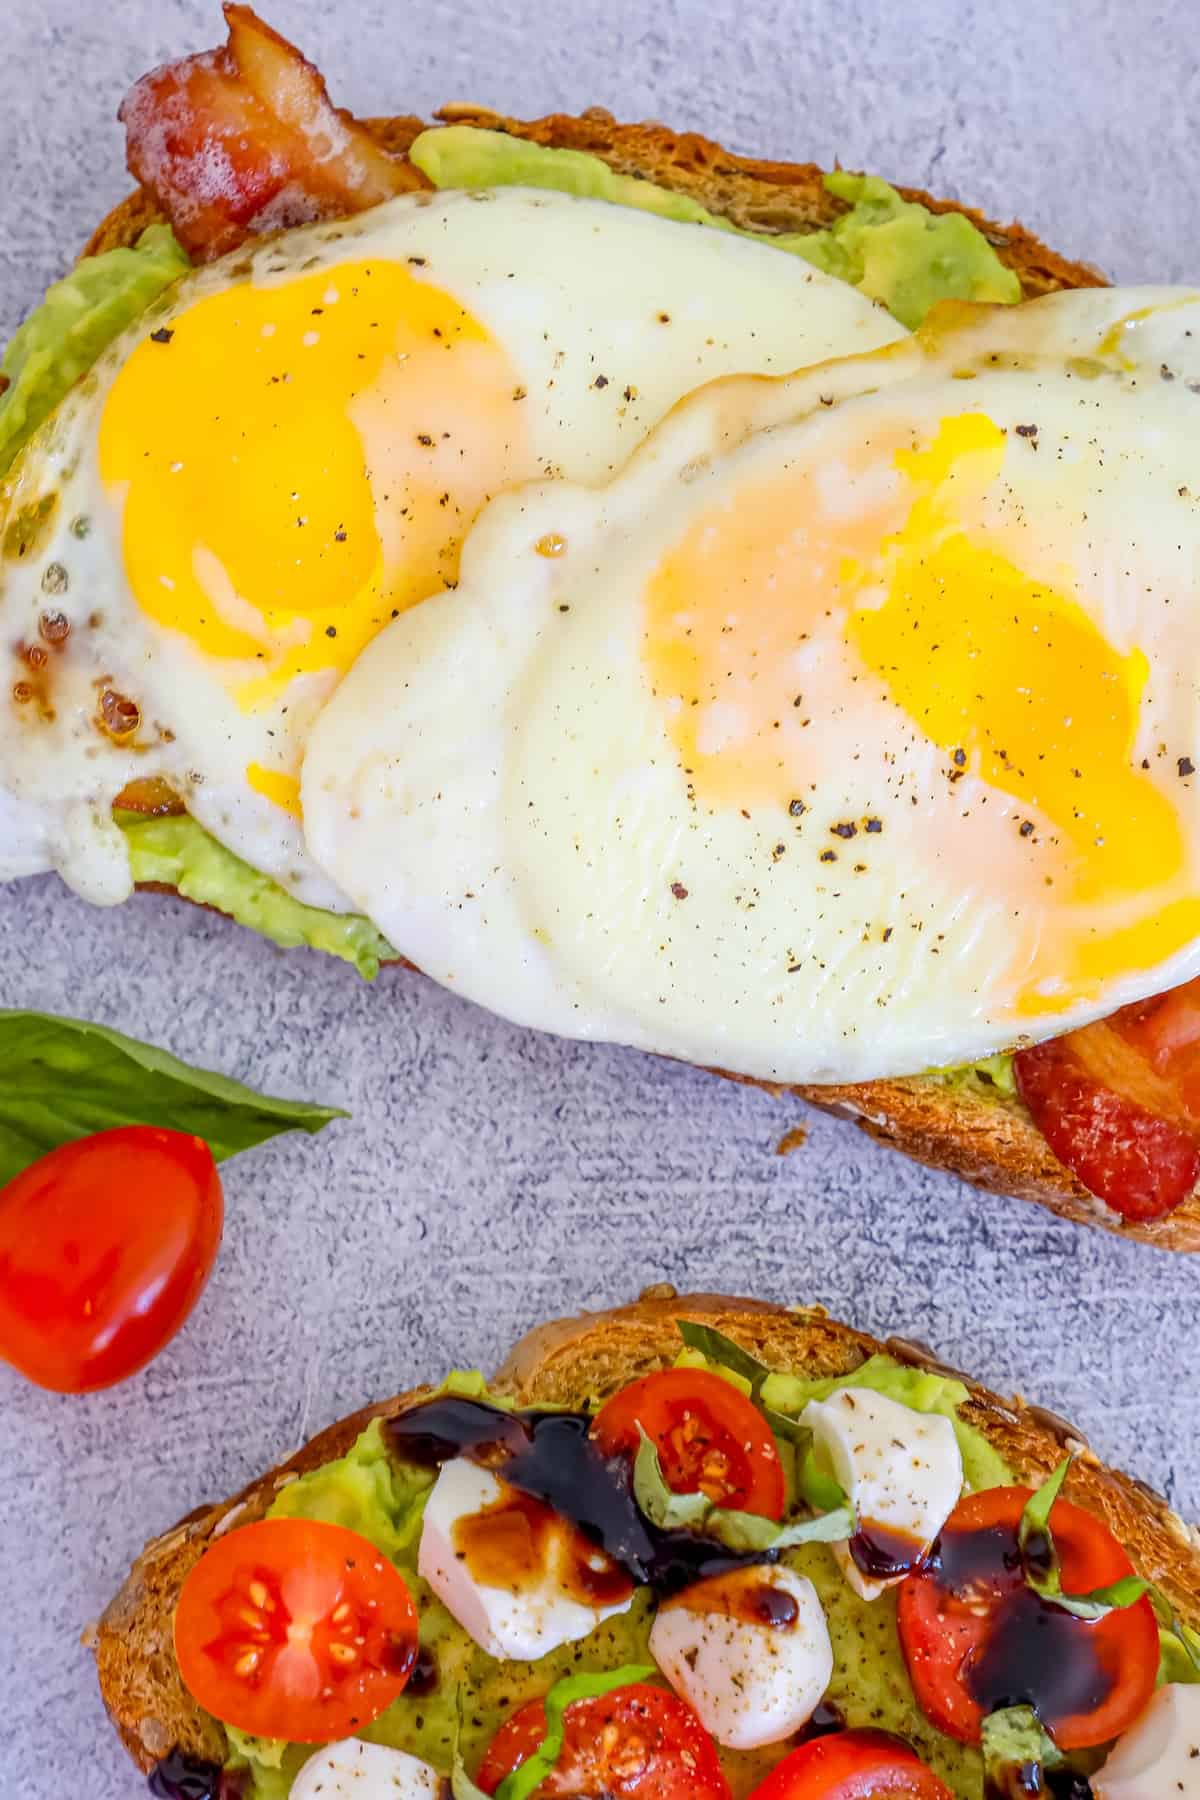 Two slices of toast with avocado, tomatoes and eggs.